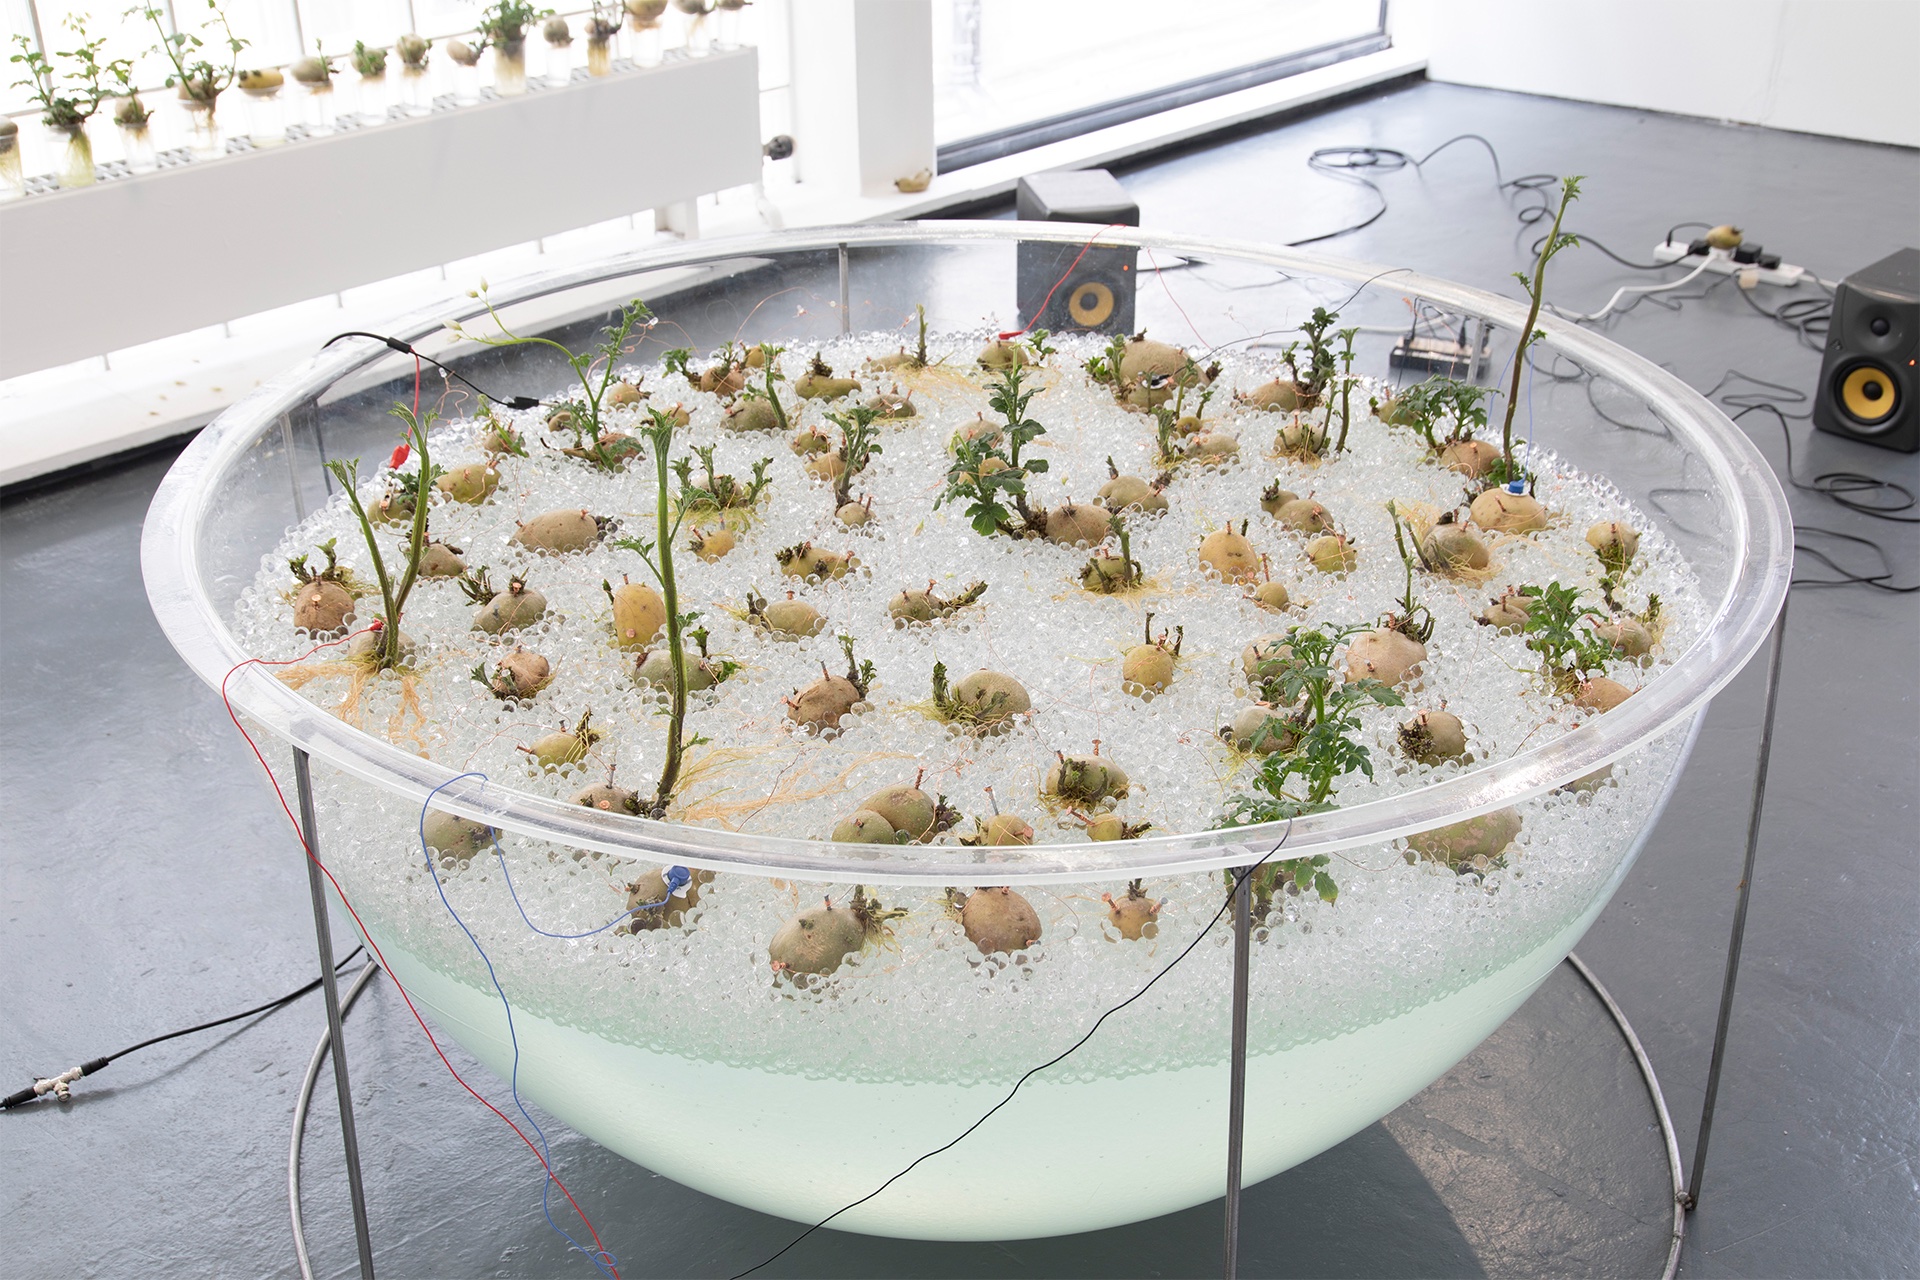 Space collective potato entity grown in orbeez filled transparent dome, sound produced by the potatoes, picked up with bio sensors, with magnetic levitating golden record and an audience of growing potatoes connected in a circuit.